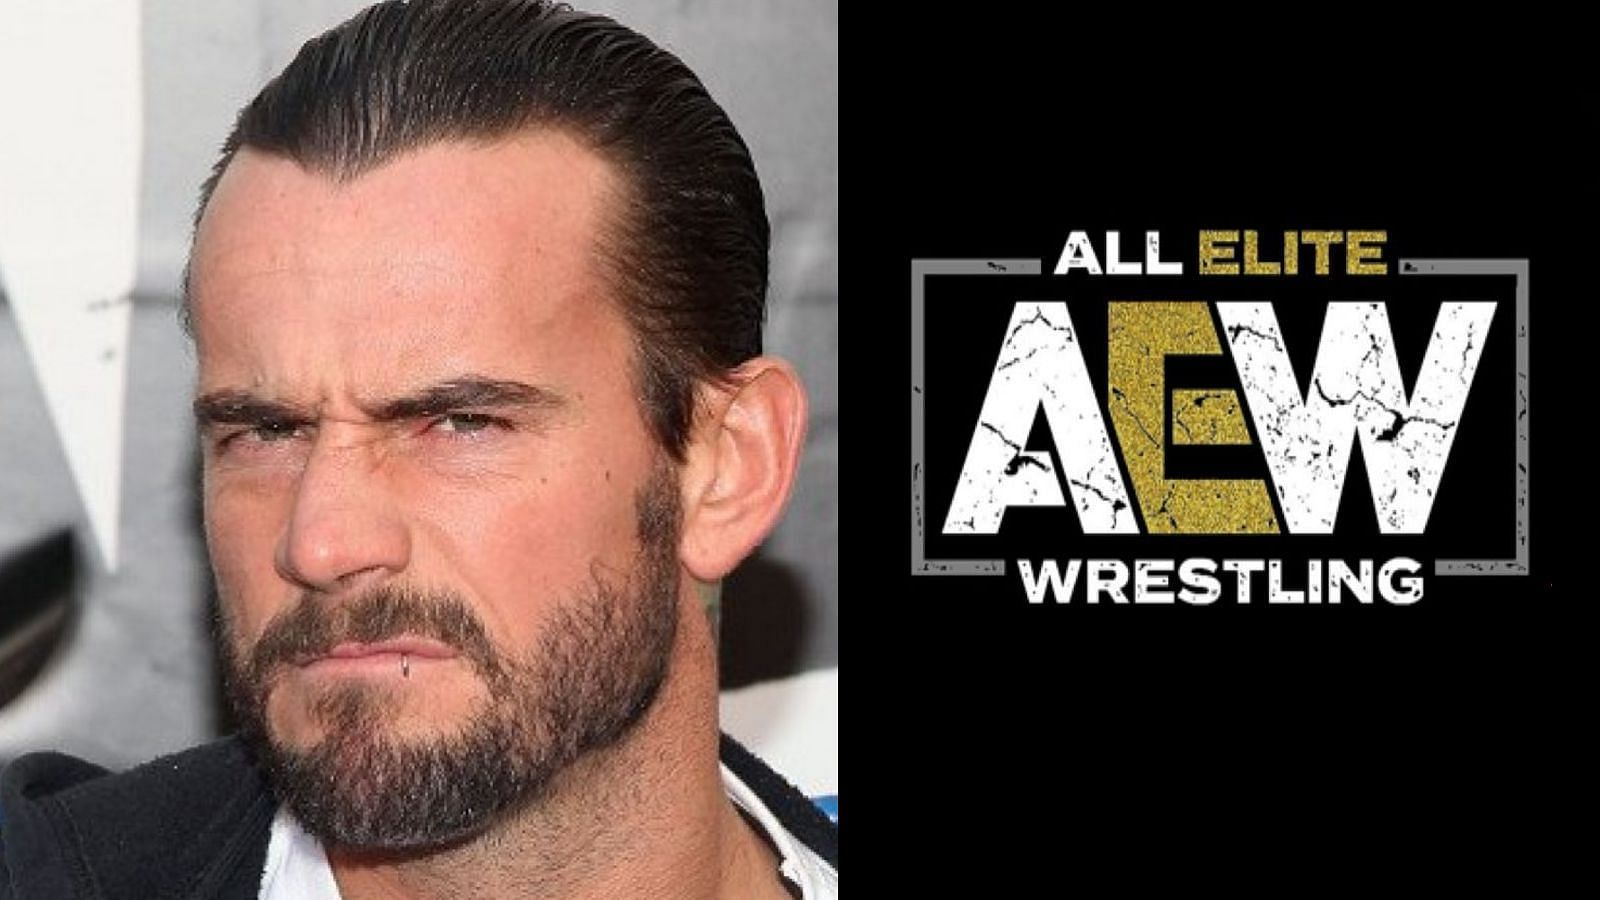 Has the Straight Edge stars absence affected the AEW locker room?